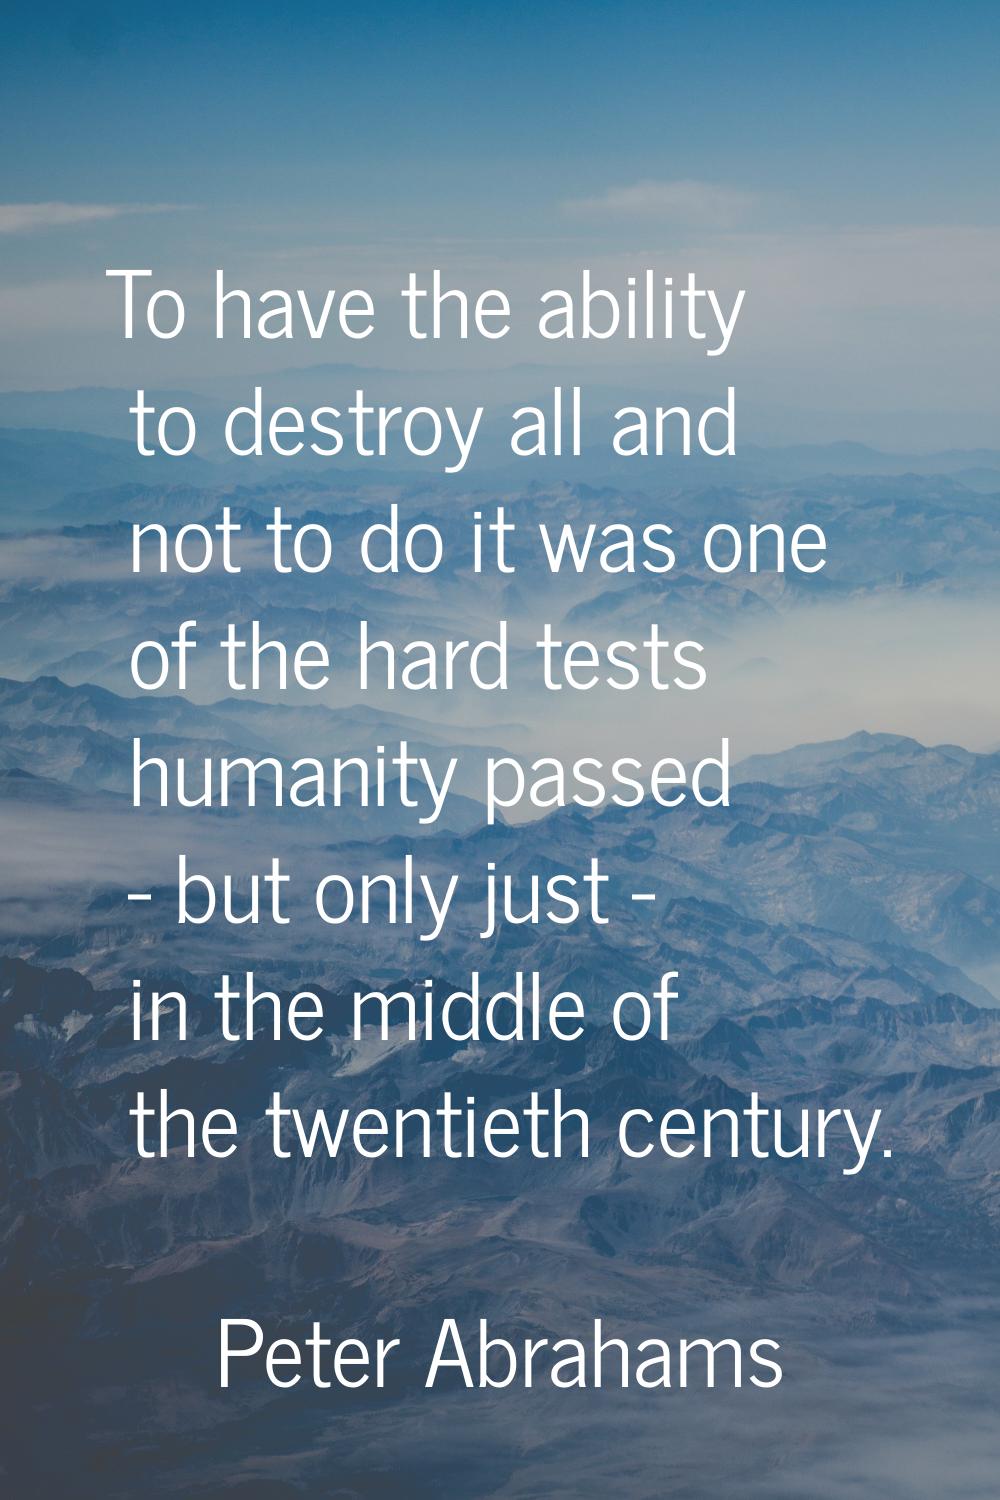 To have the ability to destroy all and not to do it was one of the hard tests humanity passed - but